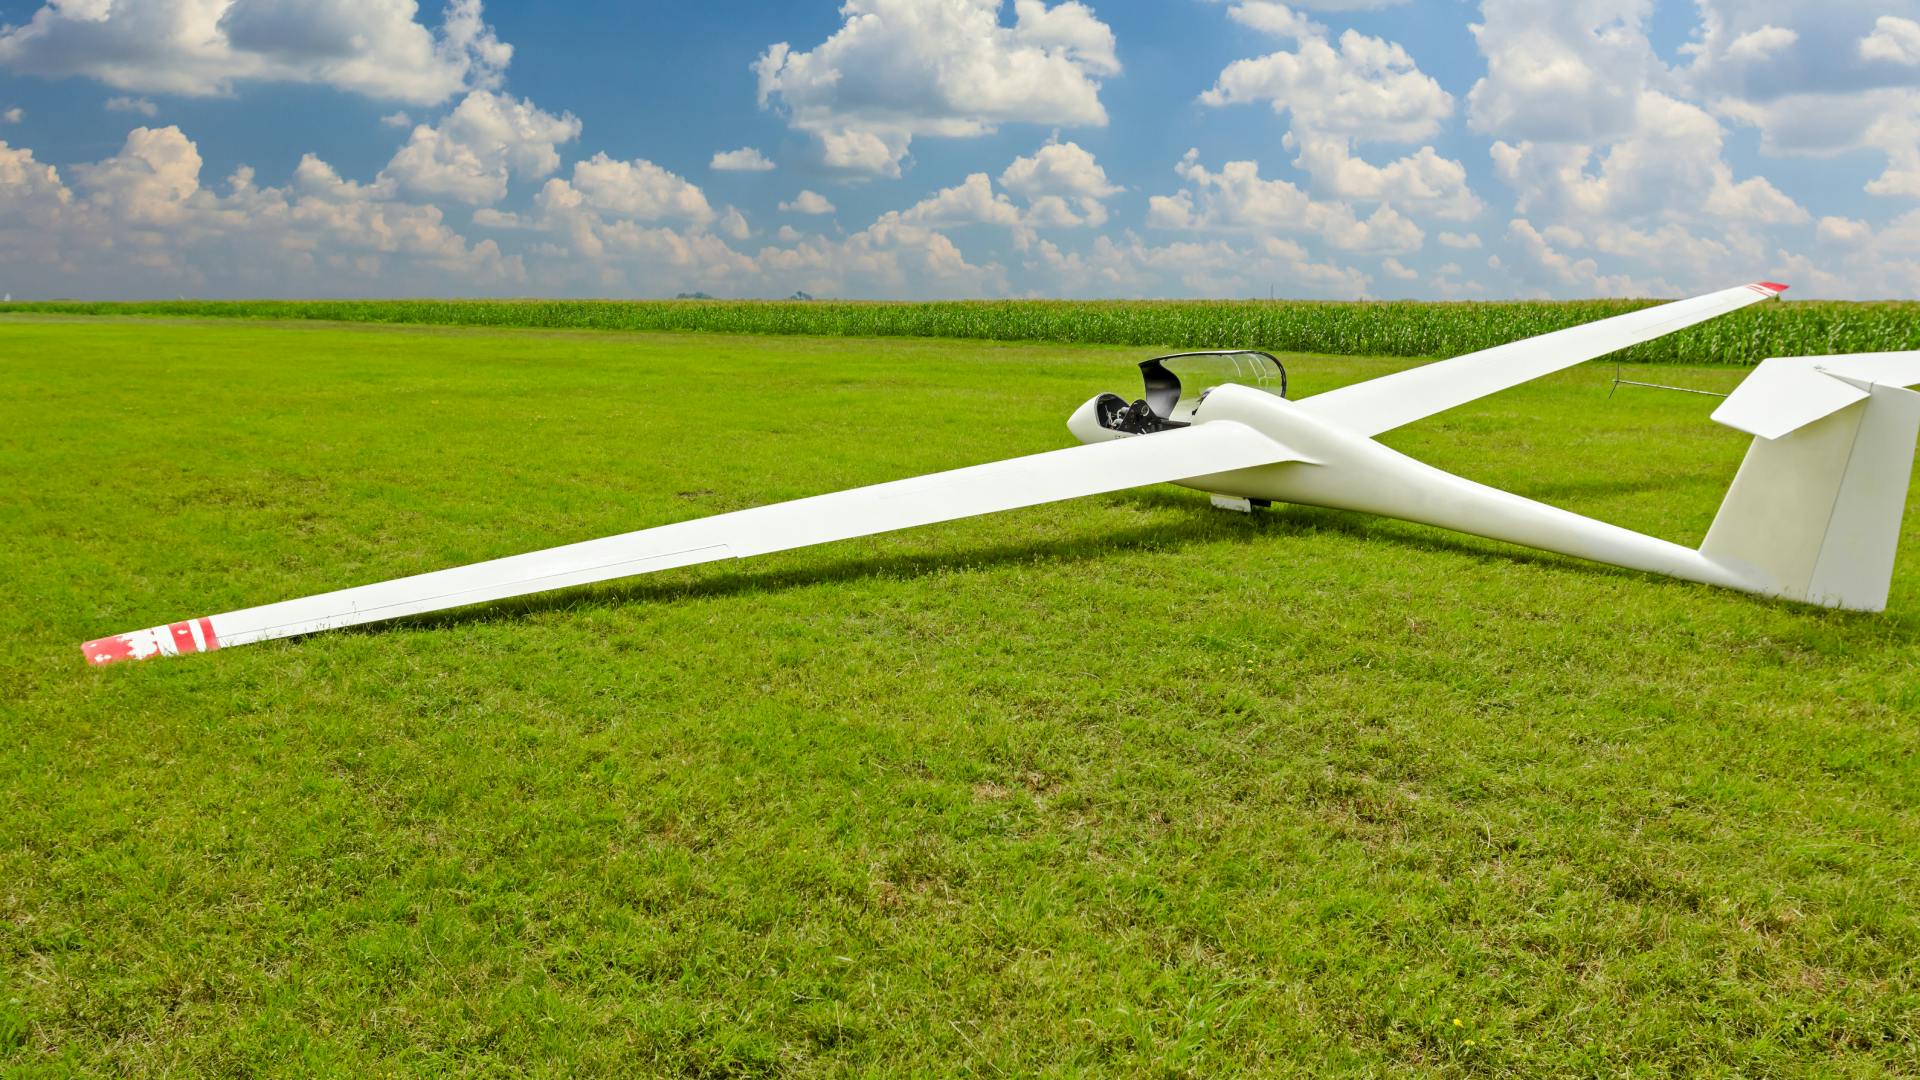 A glider in the grass represents emerging   opportunity and innovation propelling the future of sustainable aviation.